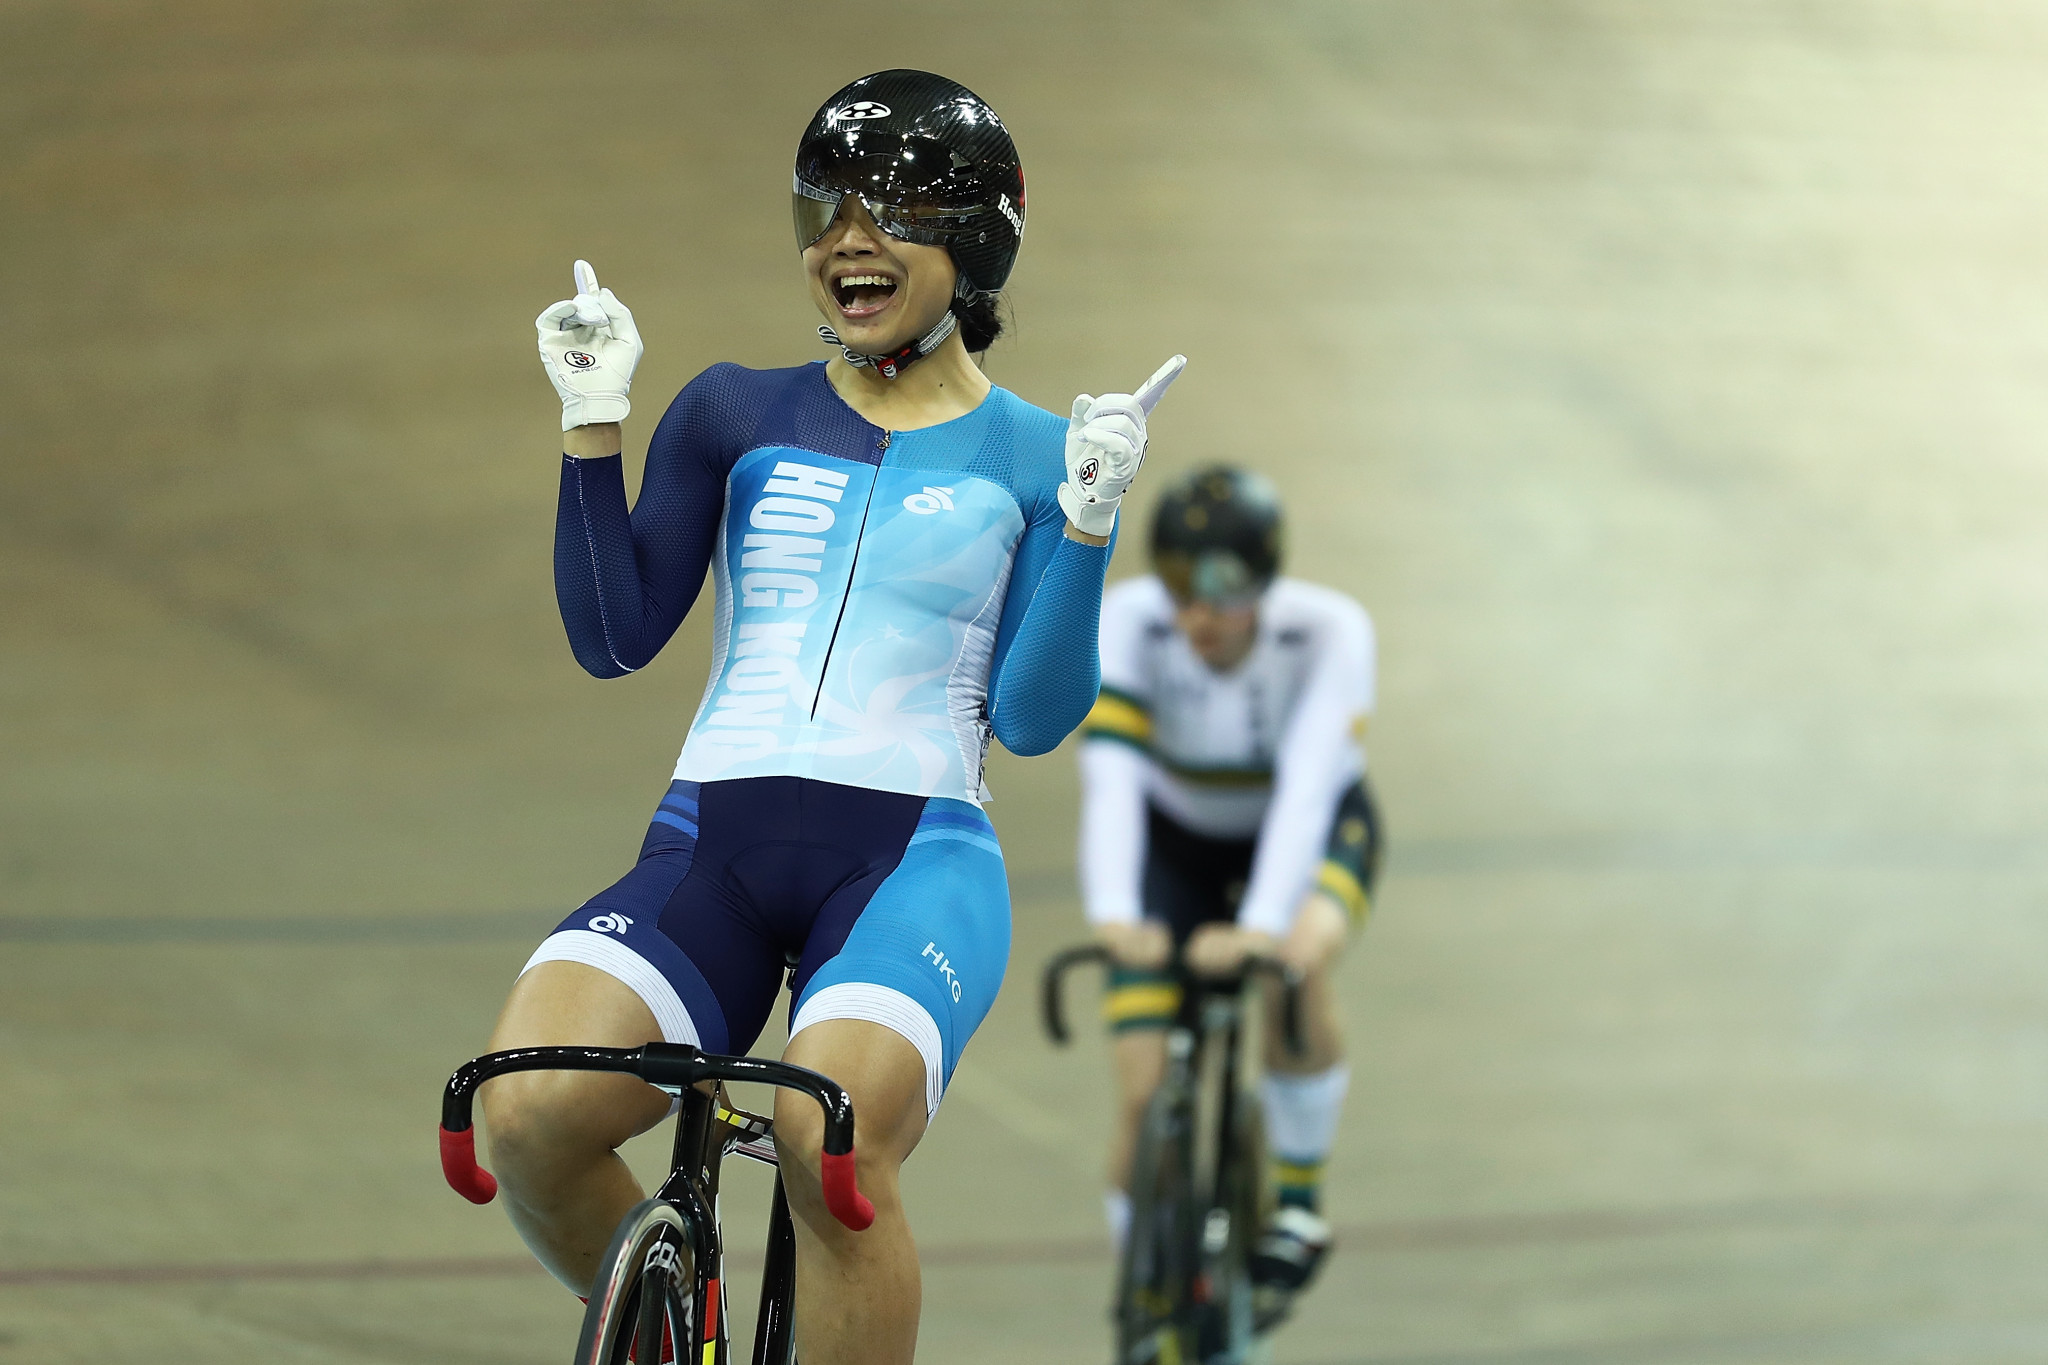 Hong Kong's Lee Wai Sze triumphed in the women's sprint competition in front of a home crowd at the UCI Track Cycling World Cup ©Getty Images